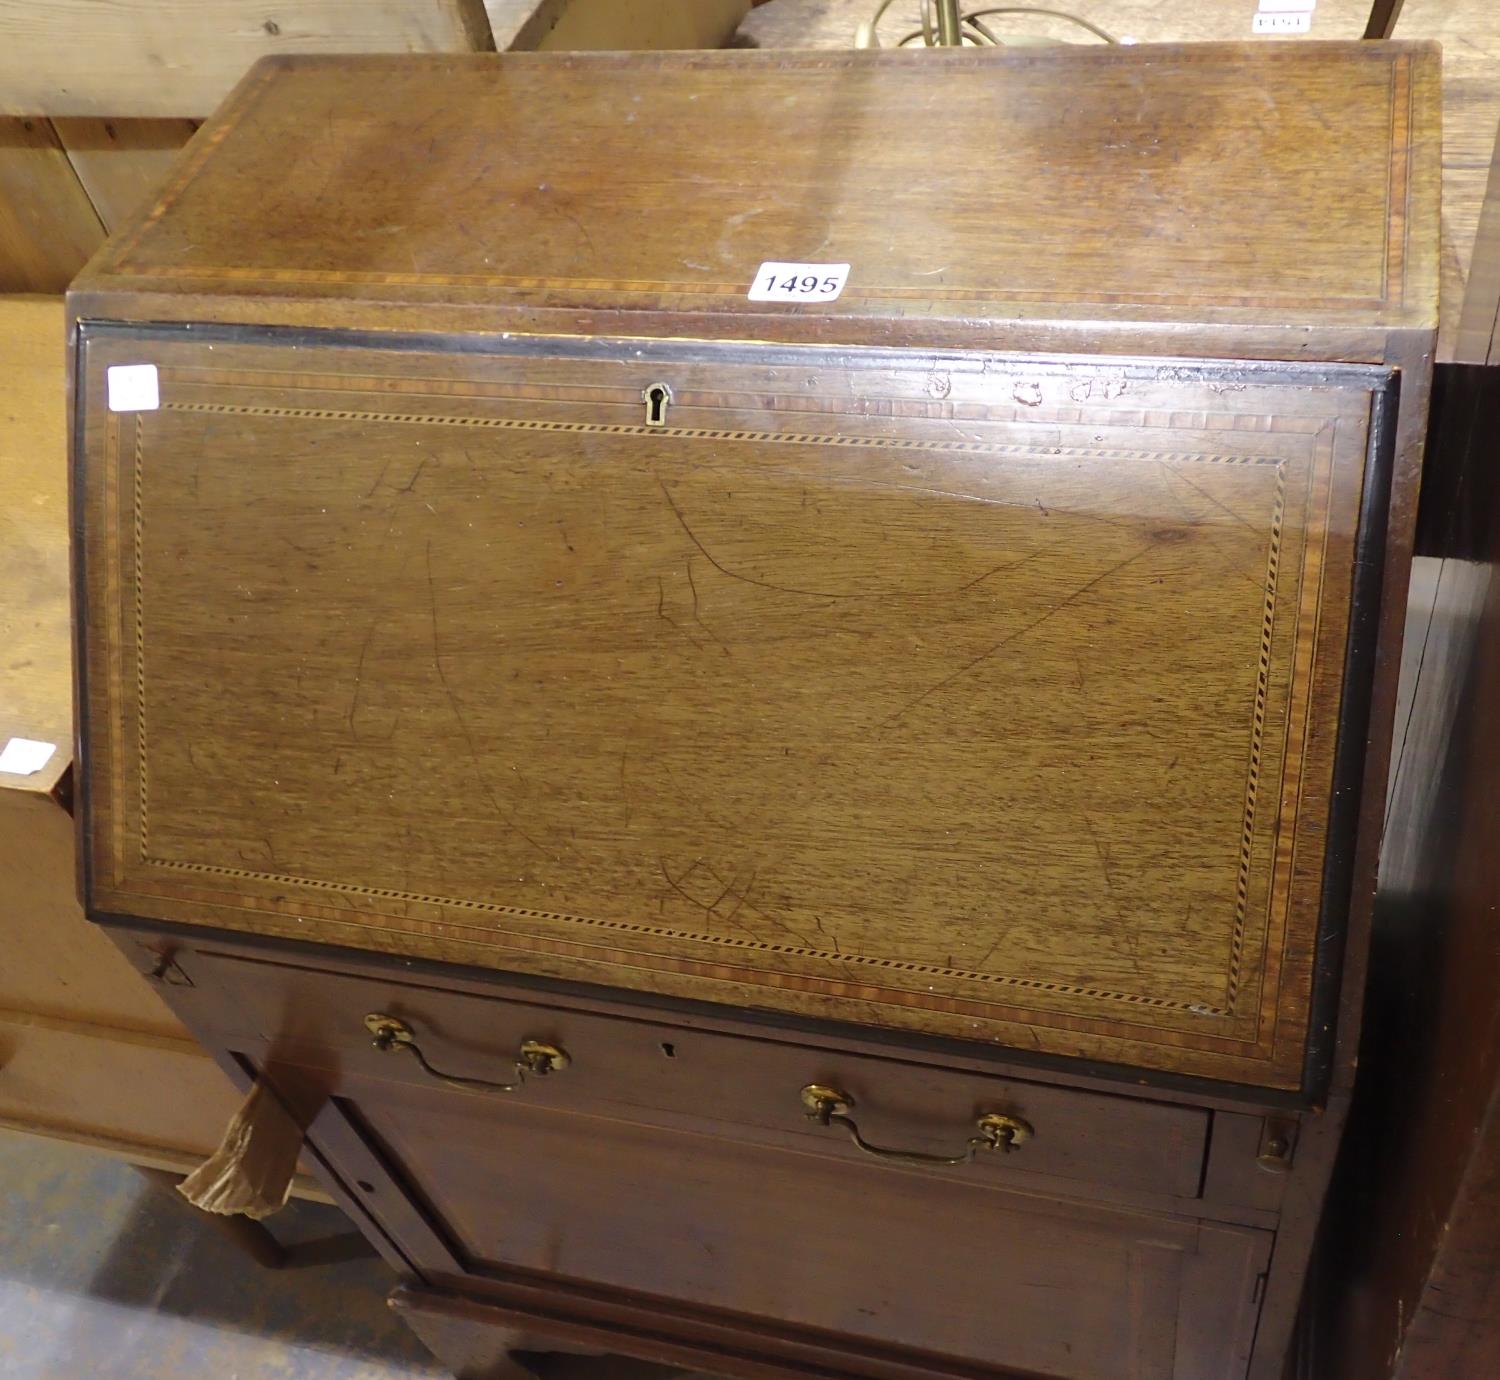 Edwardian inlaid oak bureau with fitted interior, one long drawer over a single door cupboard, 60